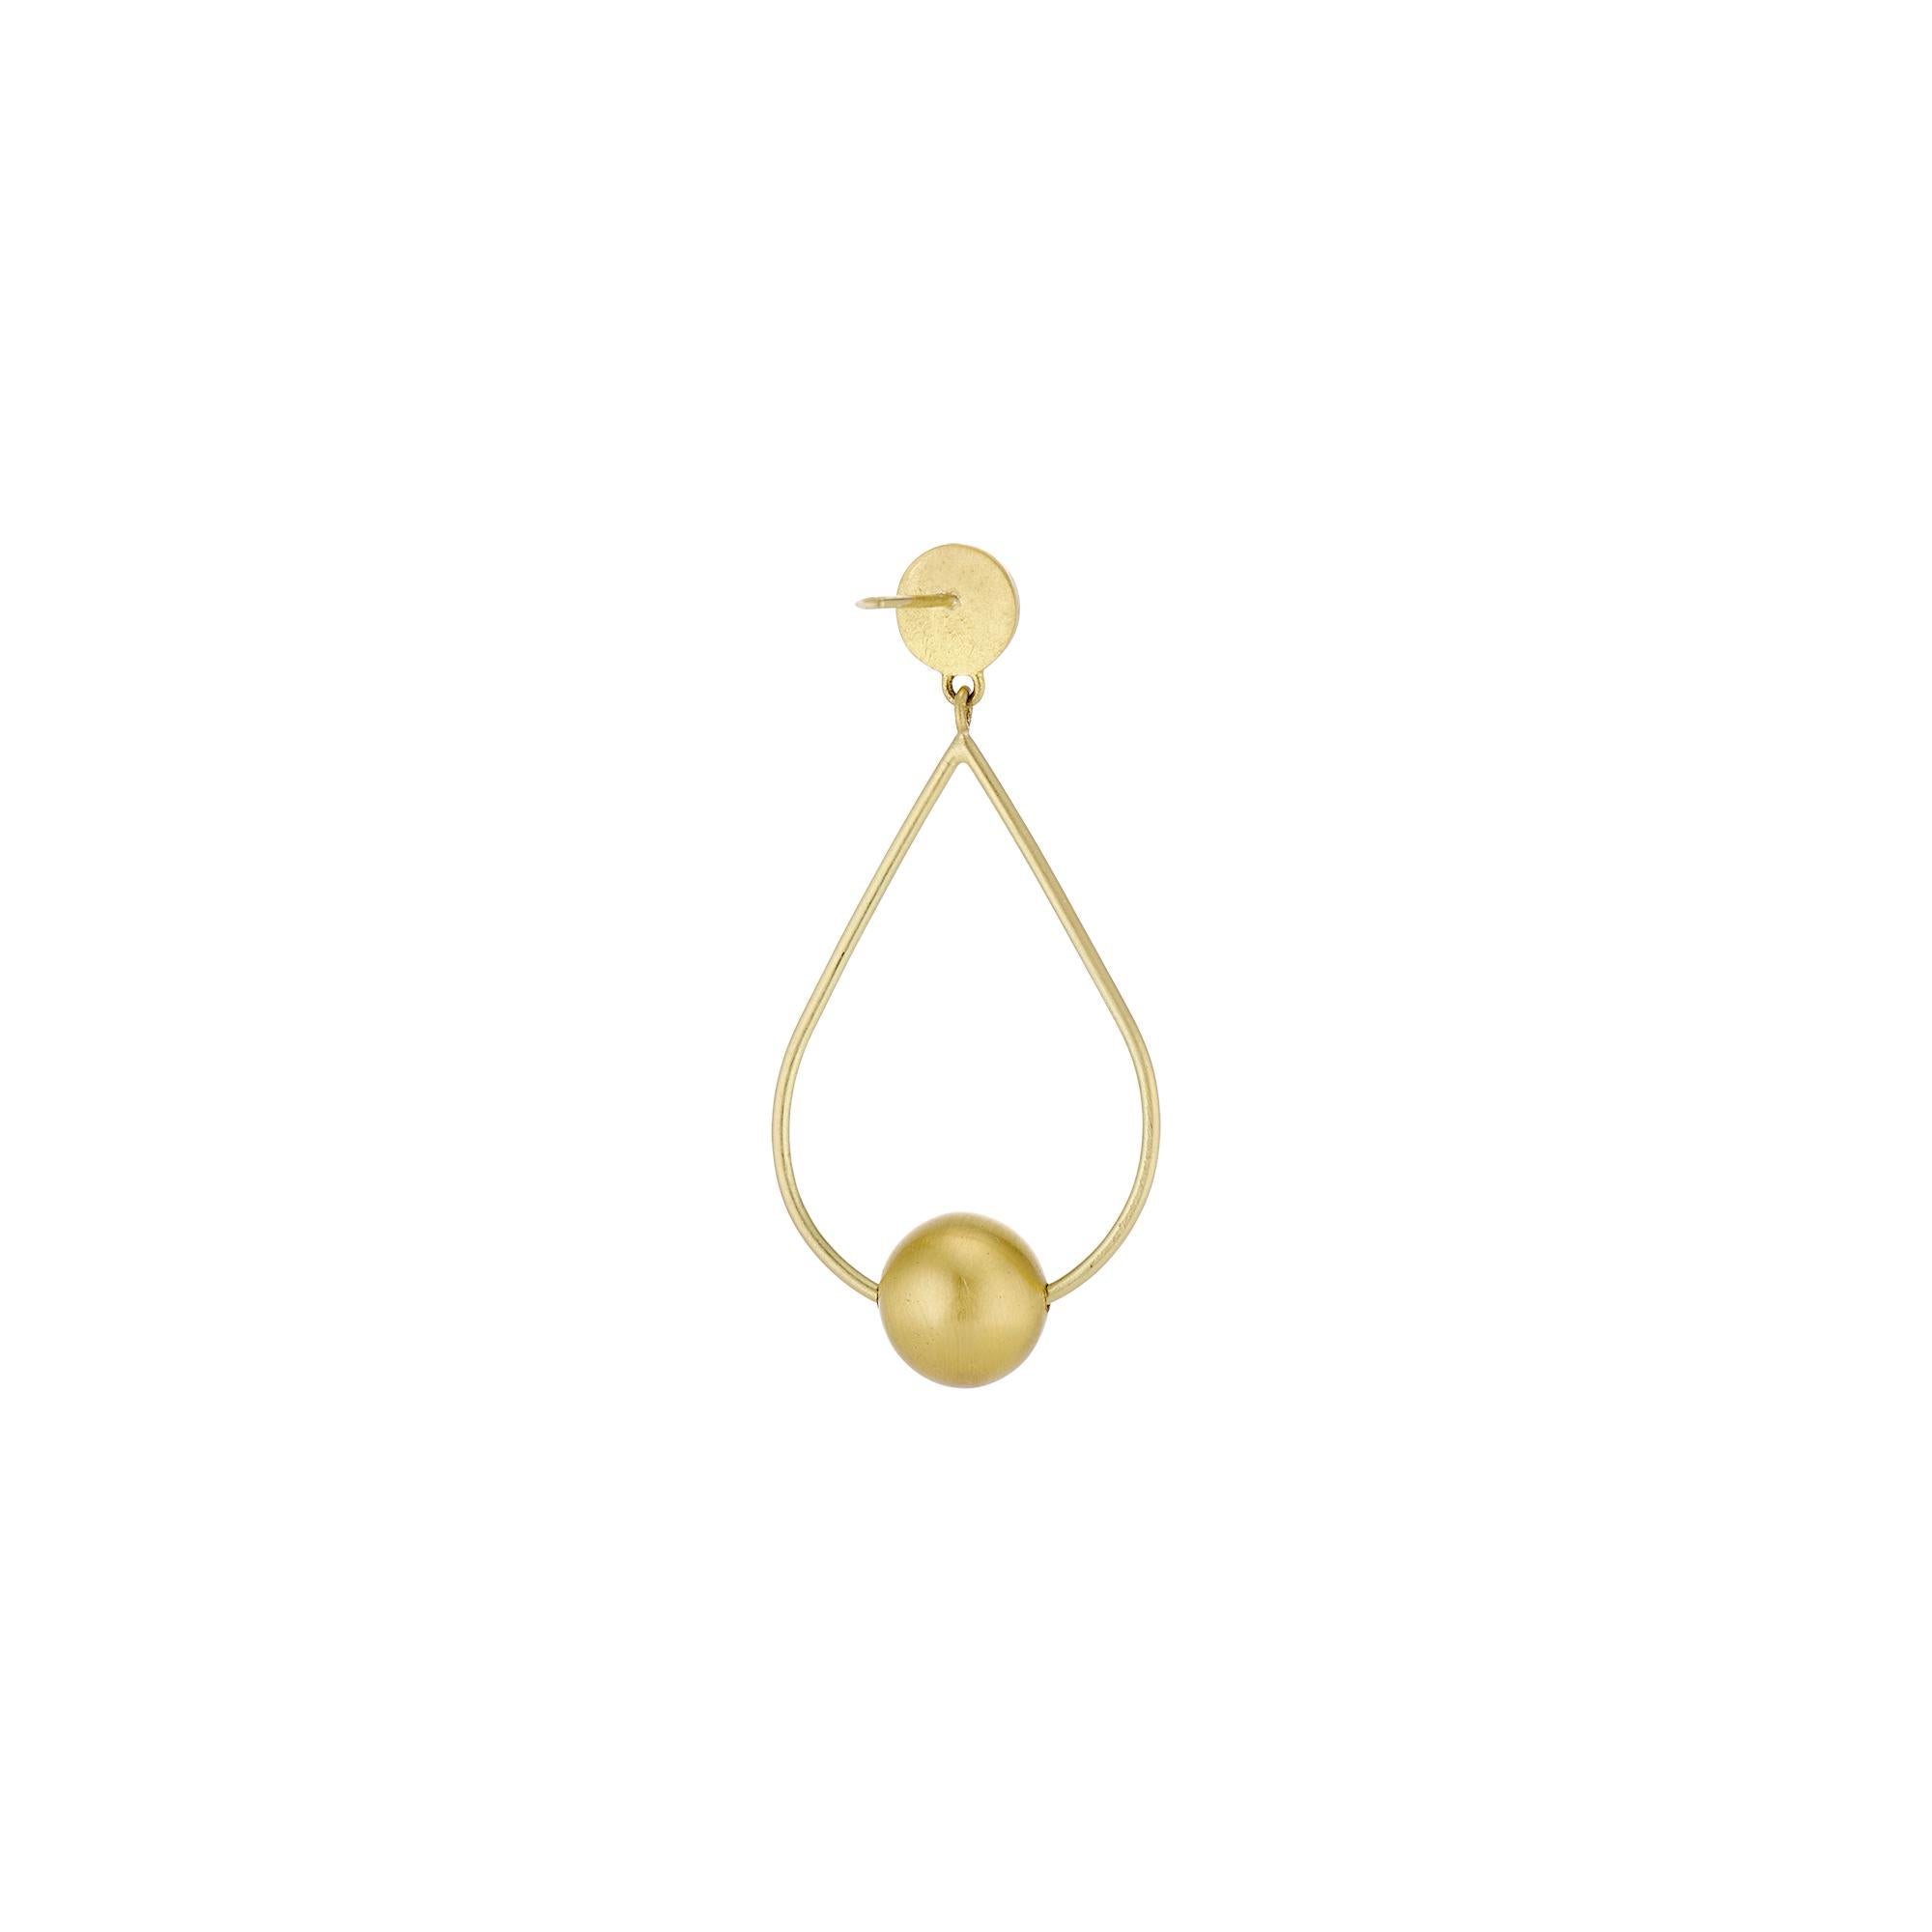 22k solid gold diamond cut and handcraftet dangling bell hoops